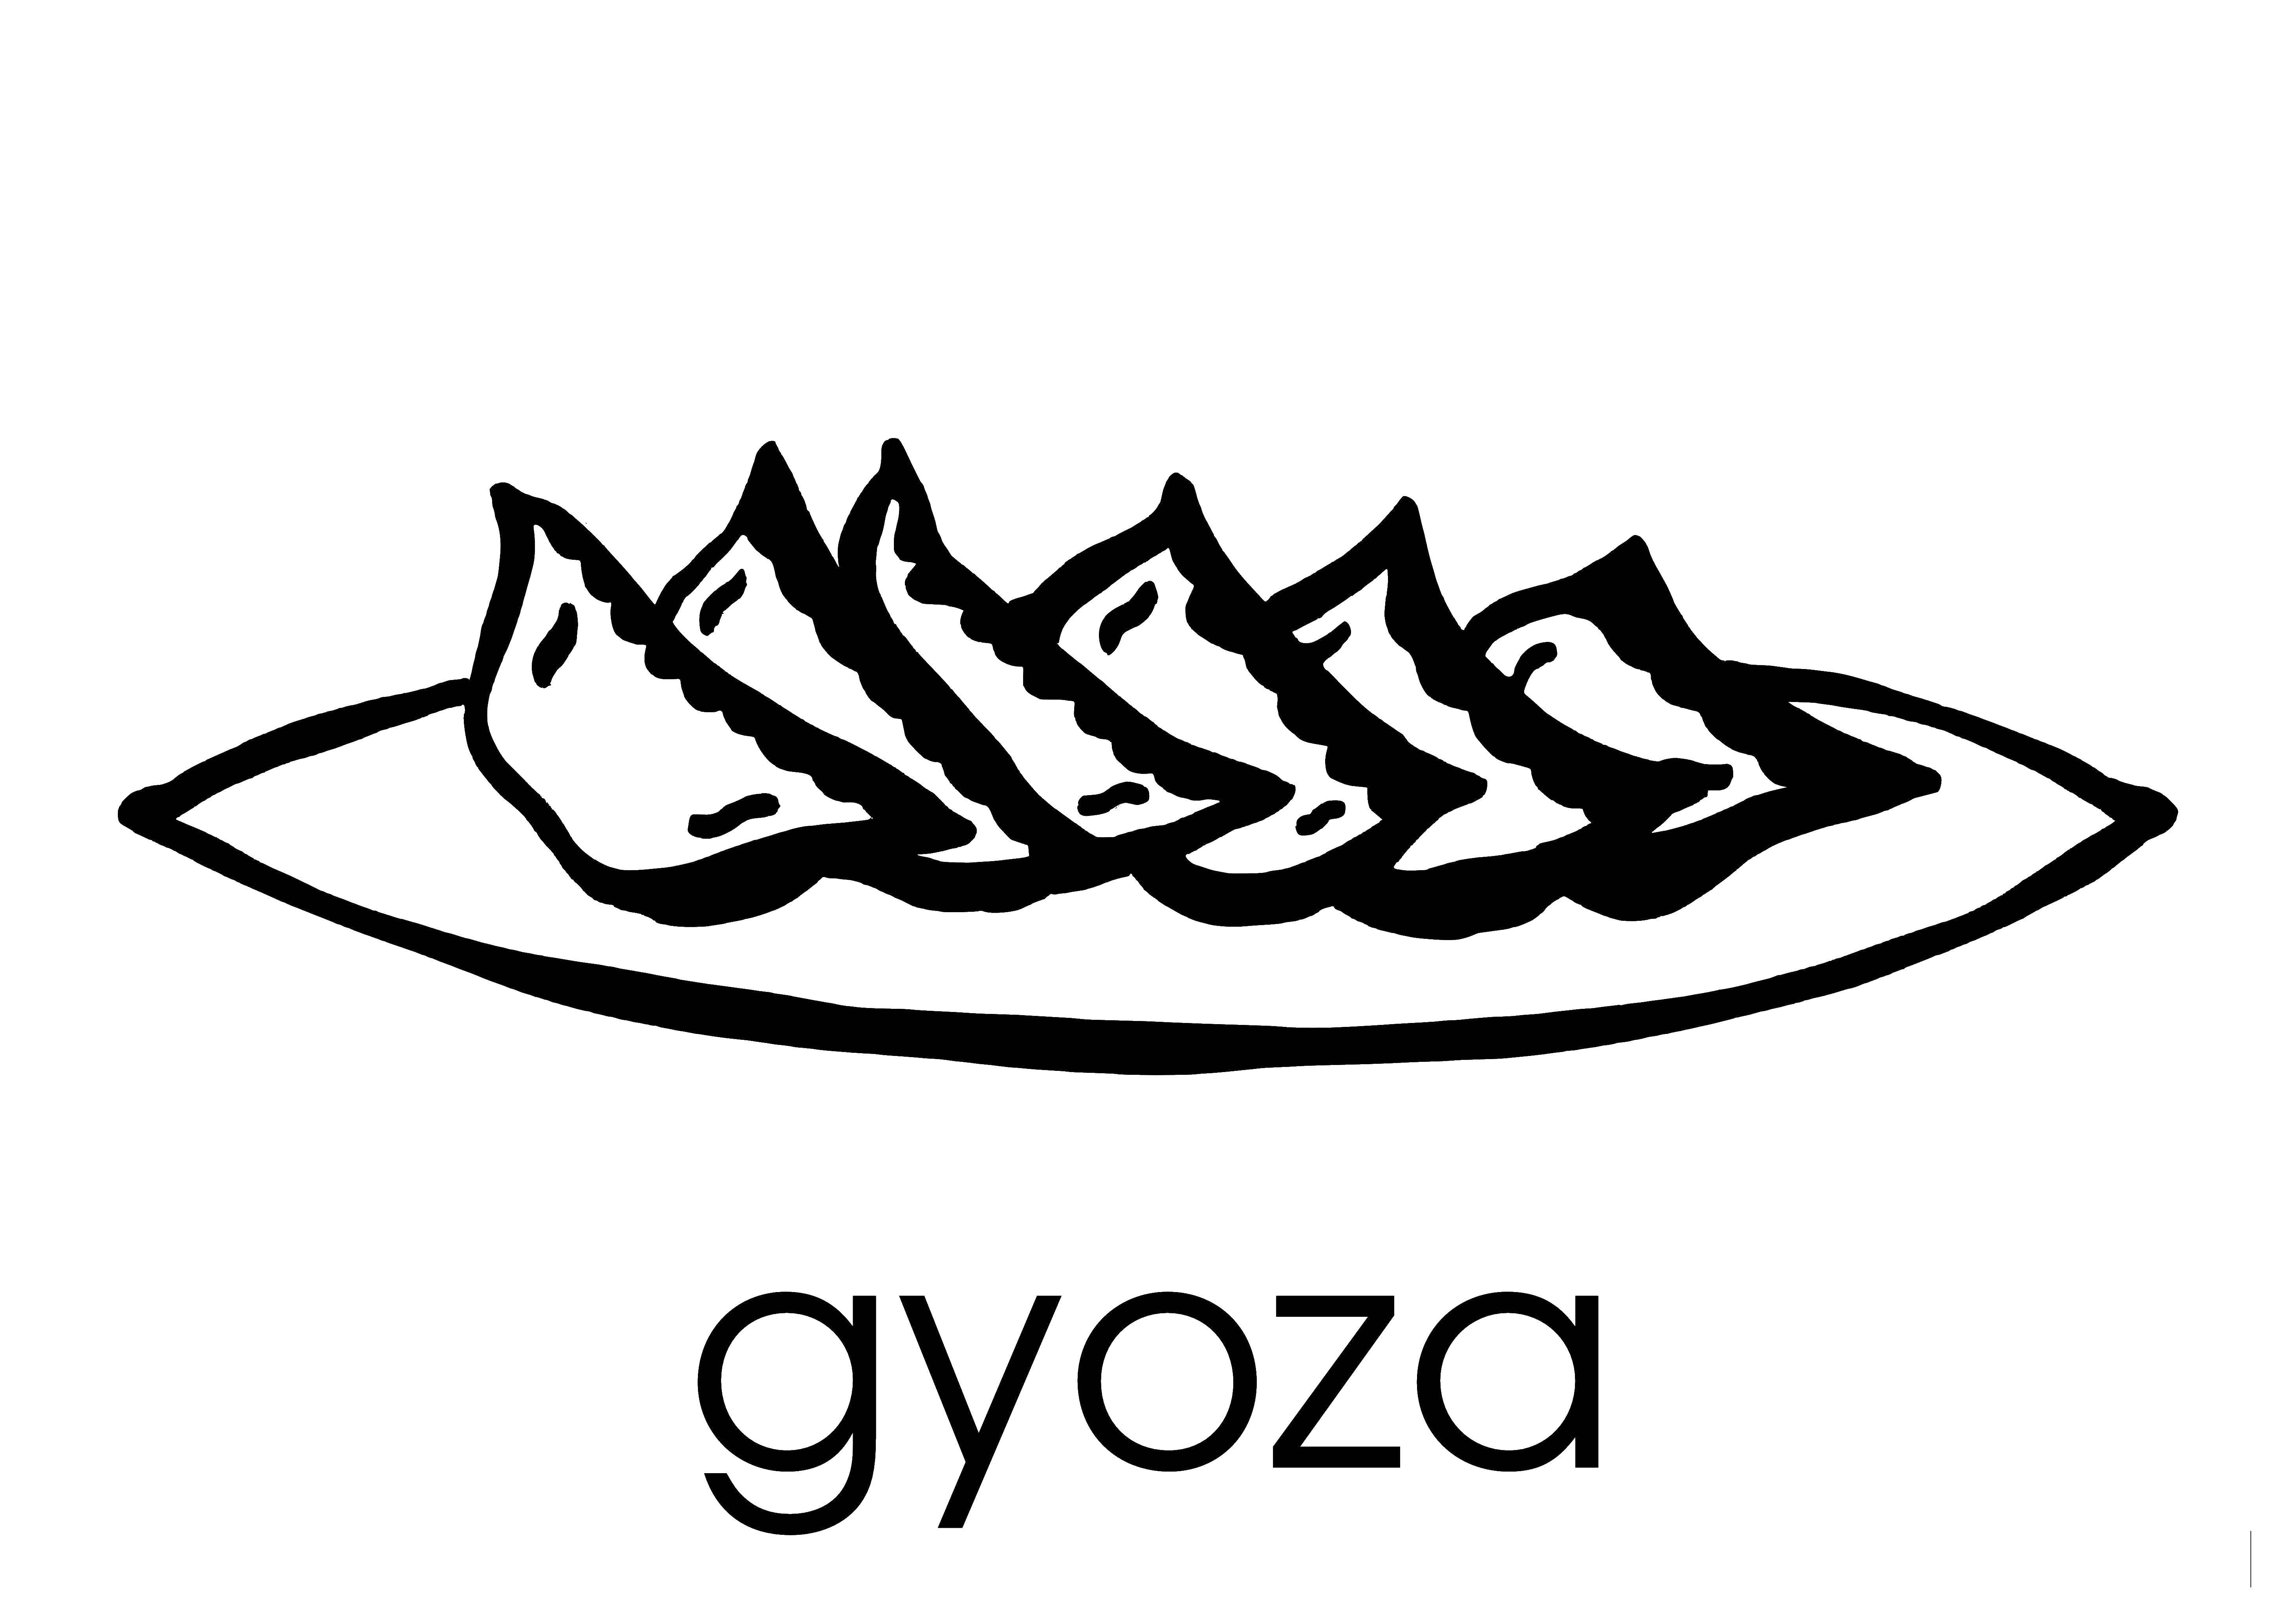 Coloring Of guoz food. Category The food. Tags:  guoz, food.